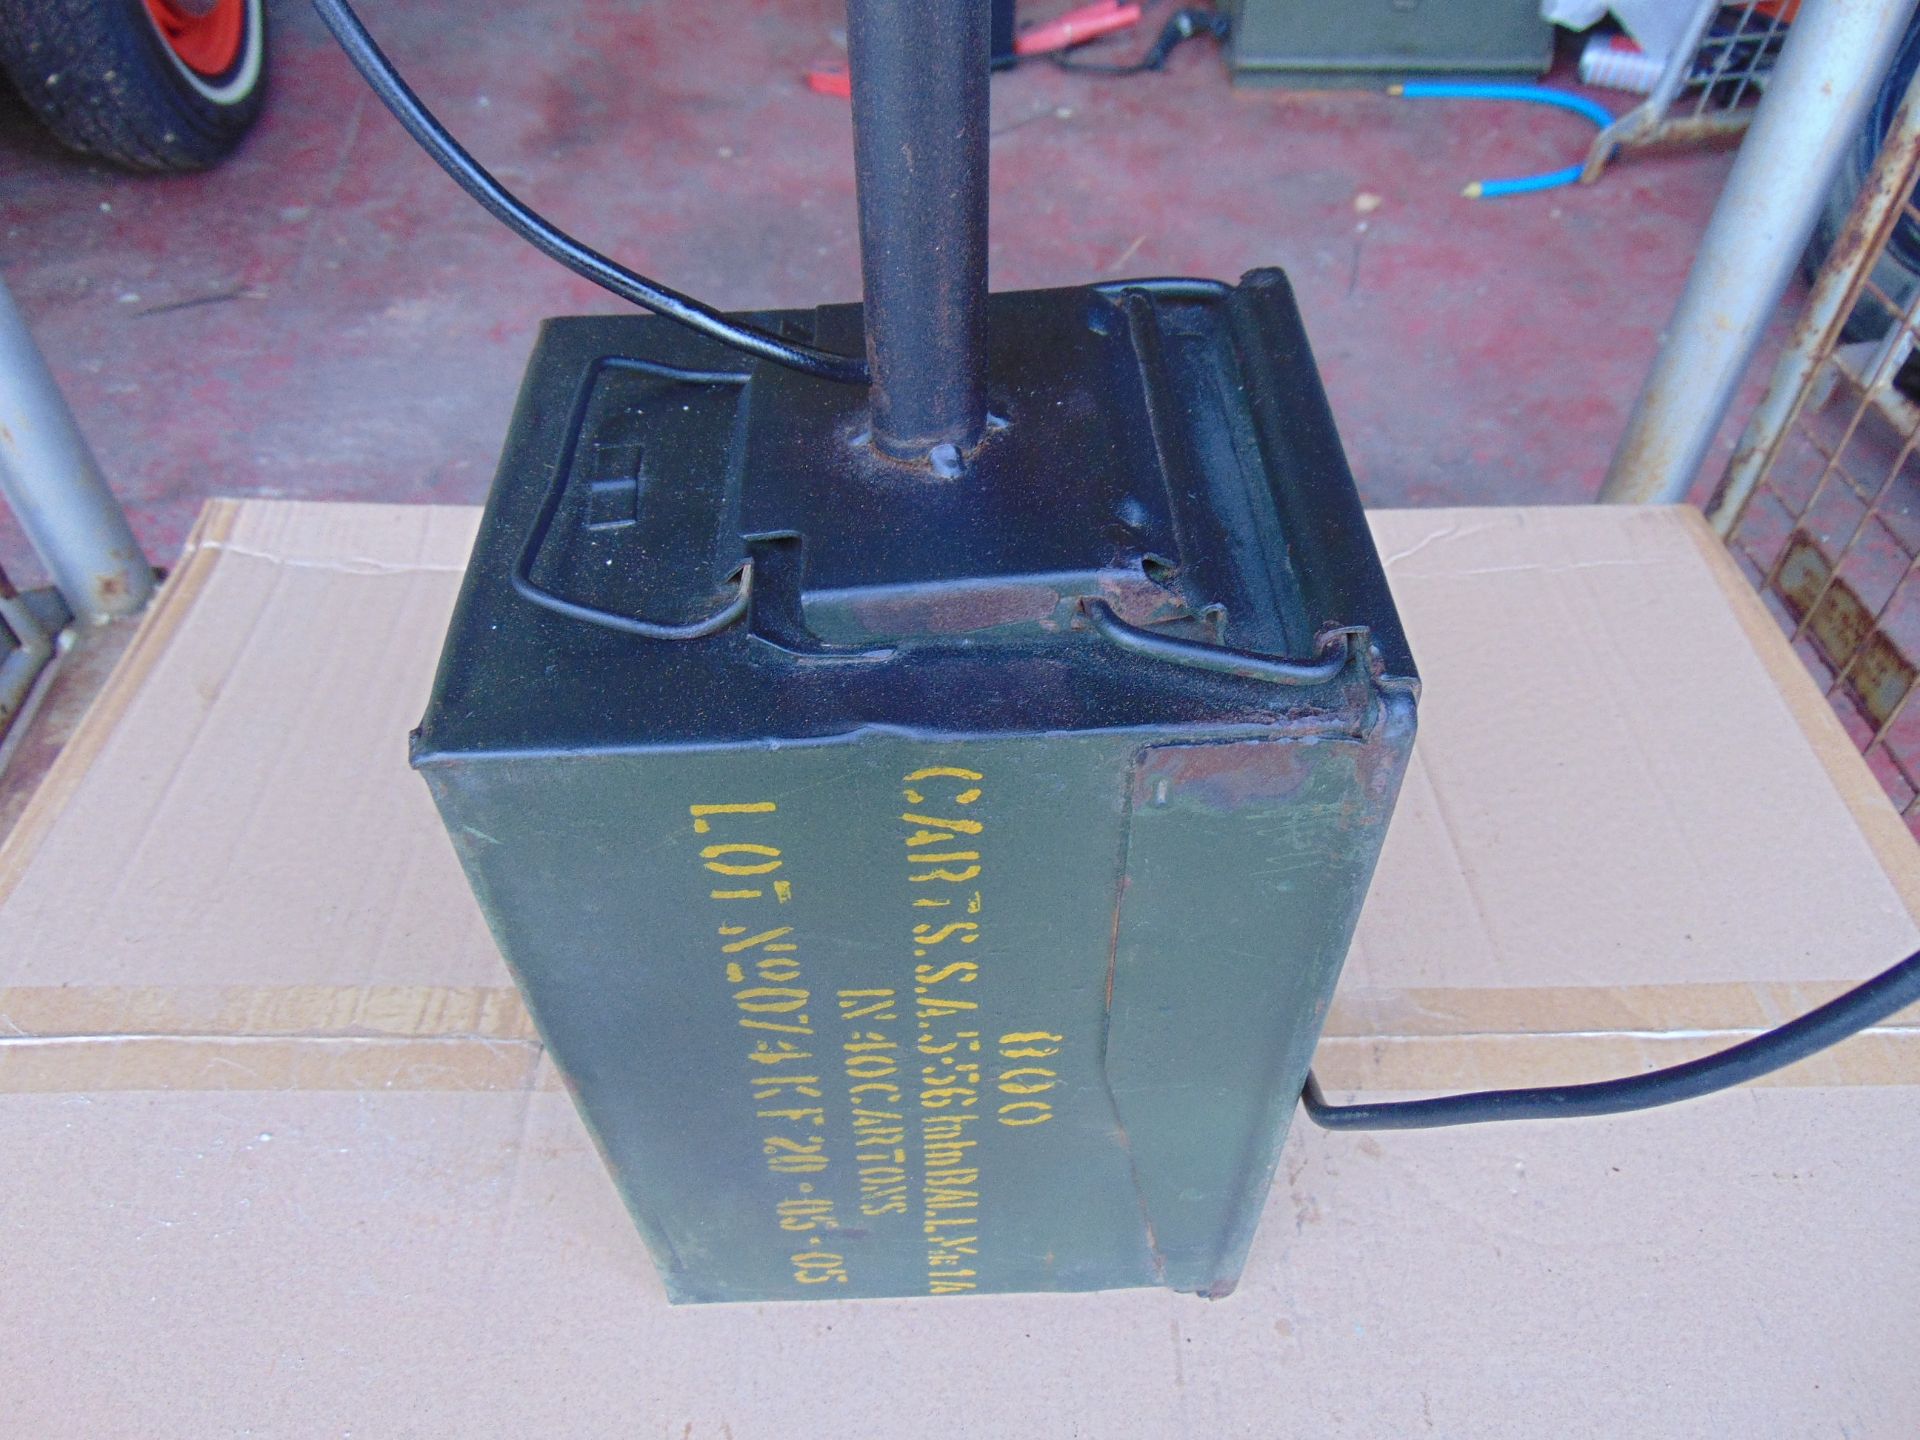 Very Unusual Military Table Lamp Made from Combat Helmet and 50 Cal Ammo Box - Image 4 of 8